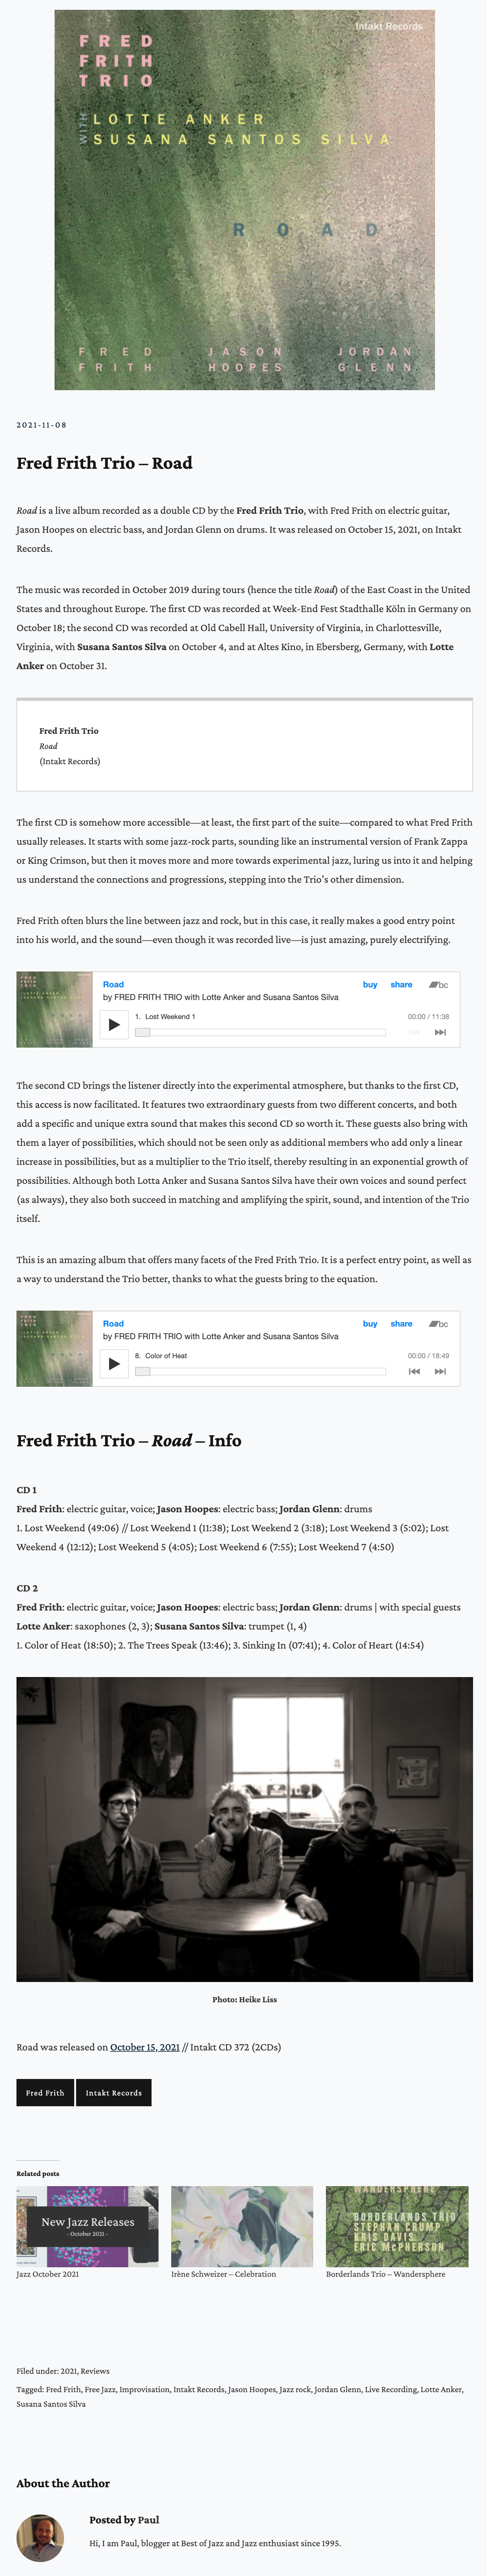 Road is a live album recorded as a double CD by the Fred Frith Trio, with Fred Frith on electric guitar, Jason Hoopes on electric bass, and Jordan Glenn on drums. It was released on October 15, 2021, on Intakt Records.